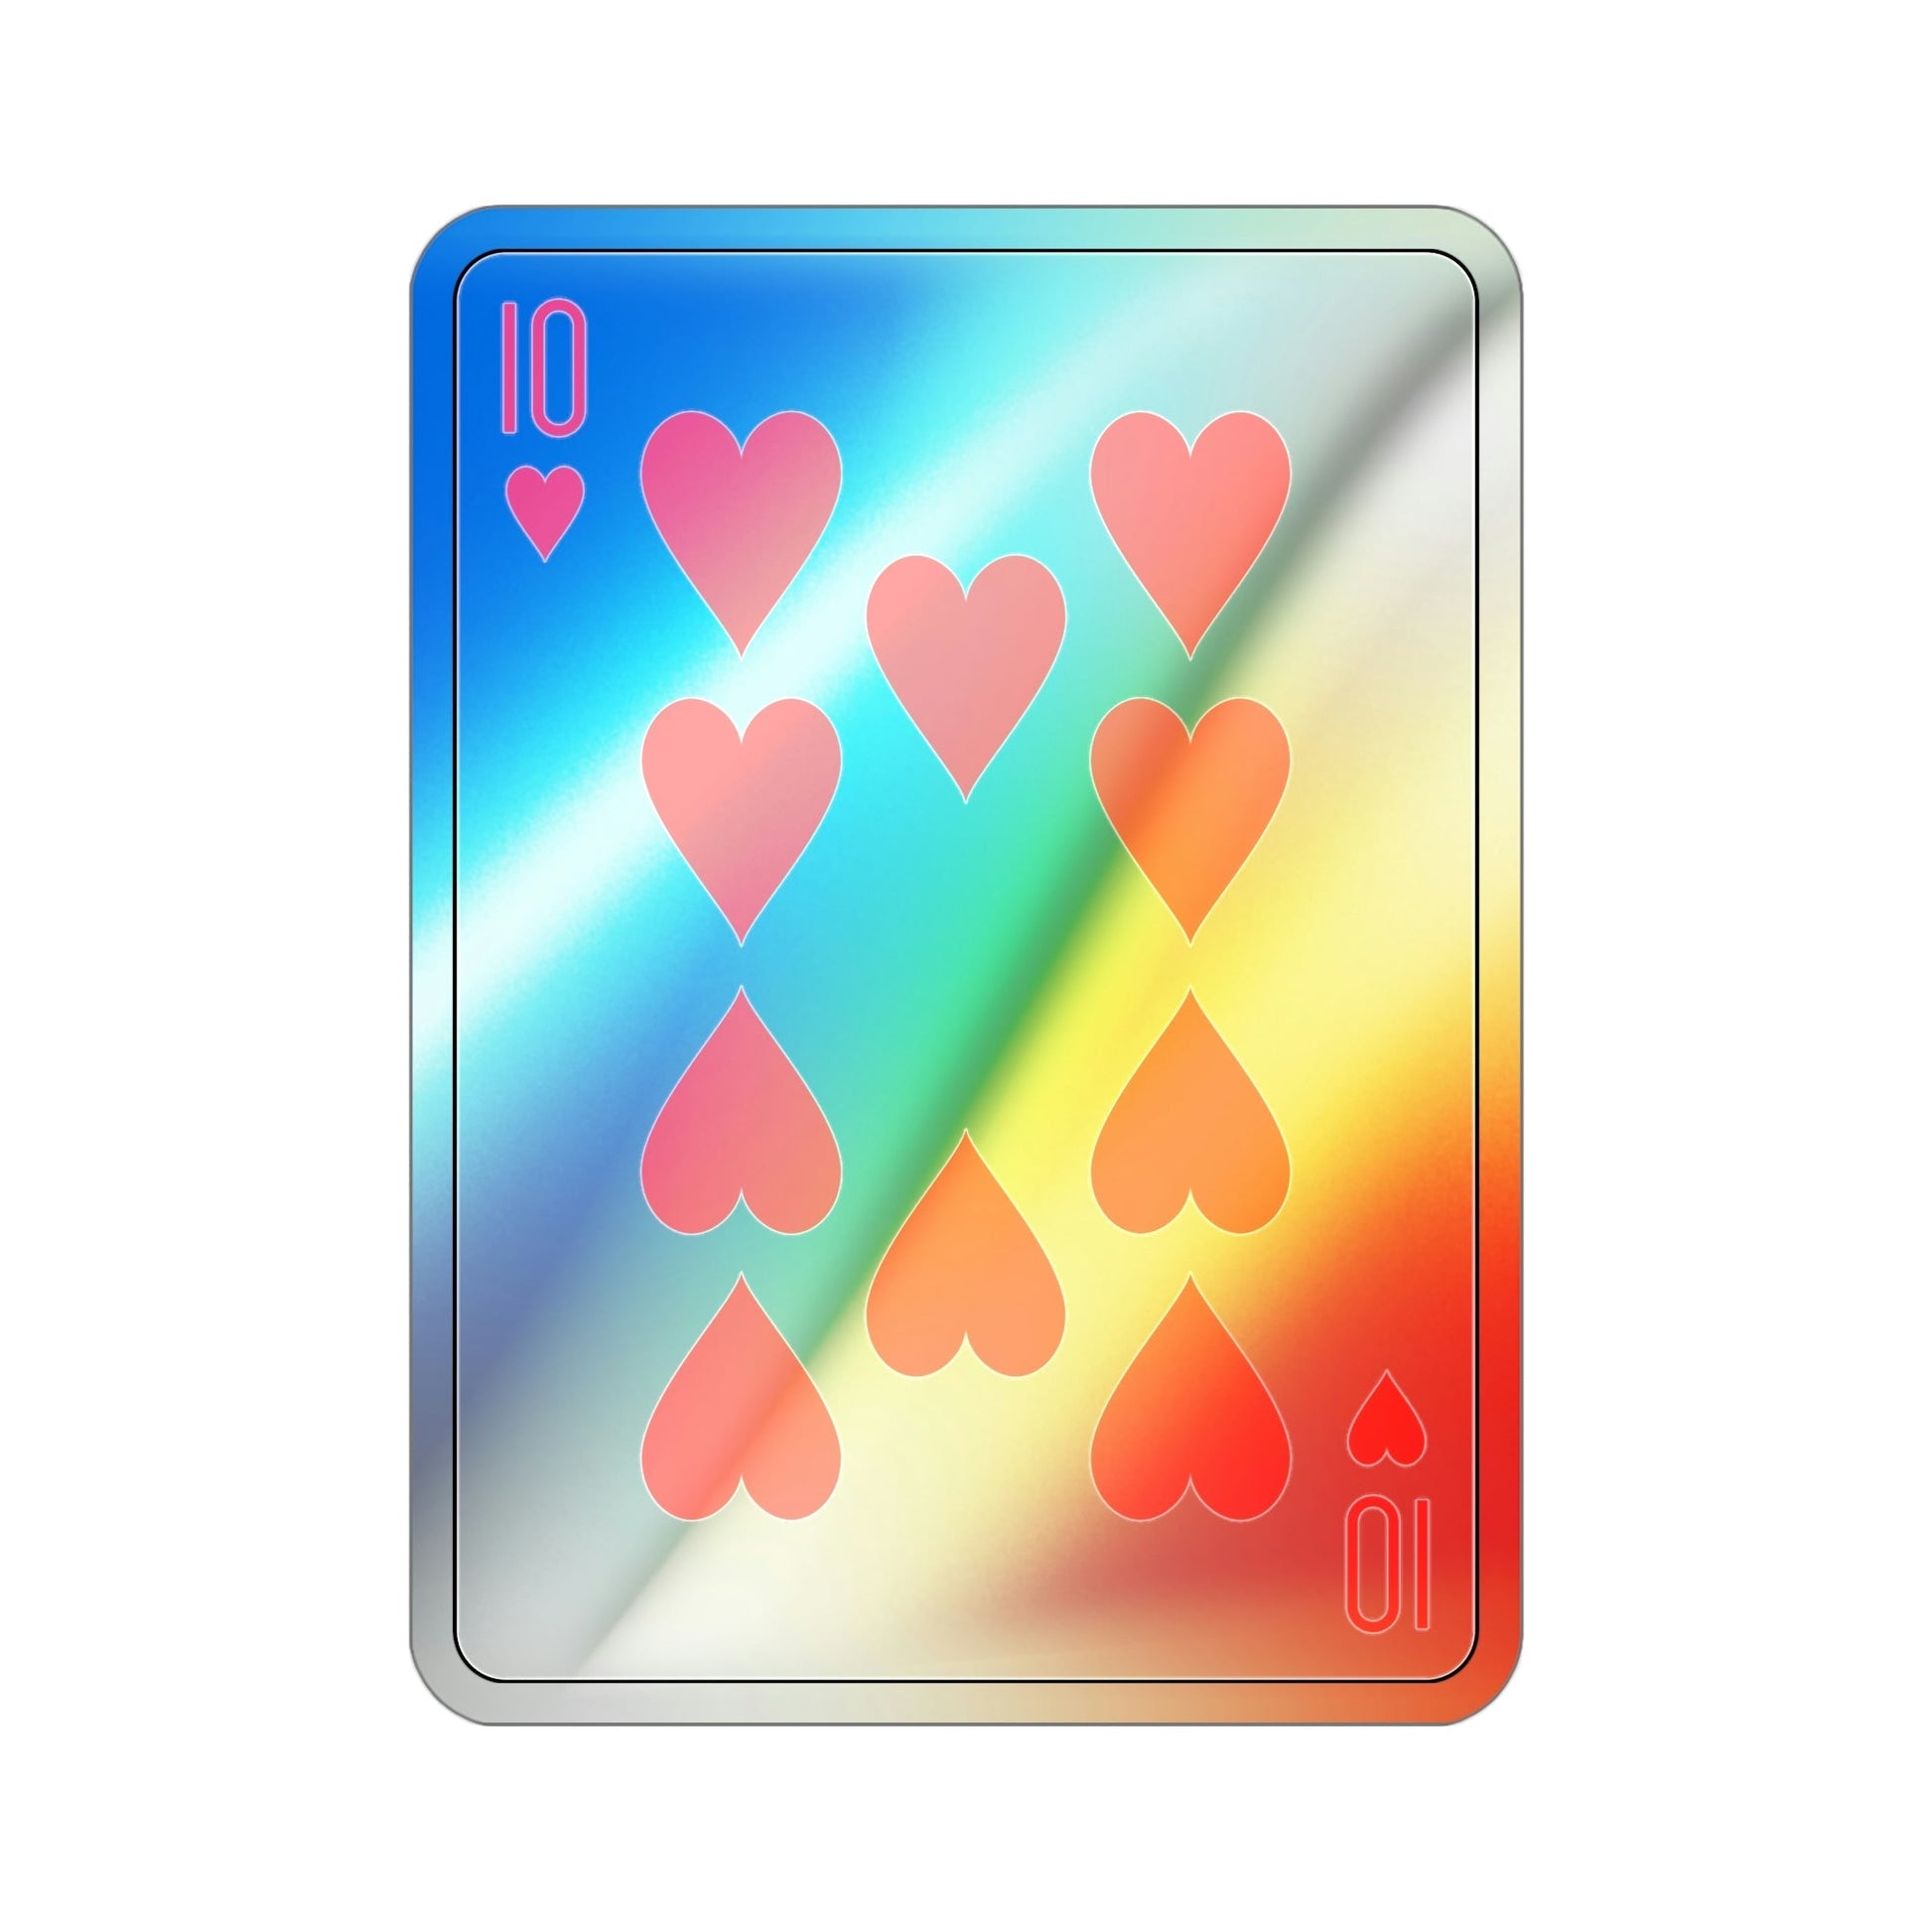 10 of Hearts Playing Card Holographic STICKER Die-Cut Vinyl Decal-4 Inch-The Sticker Space